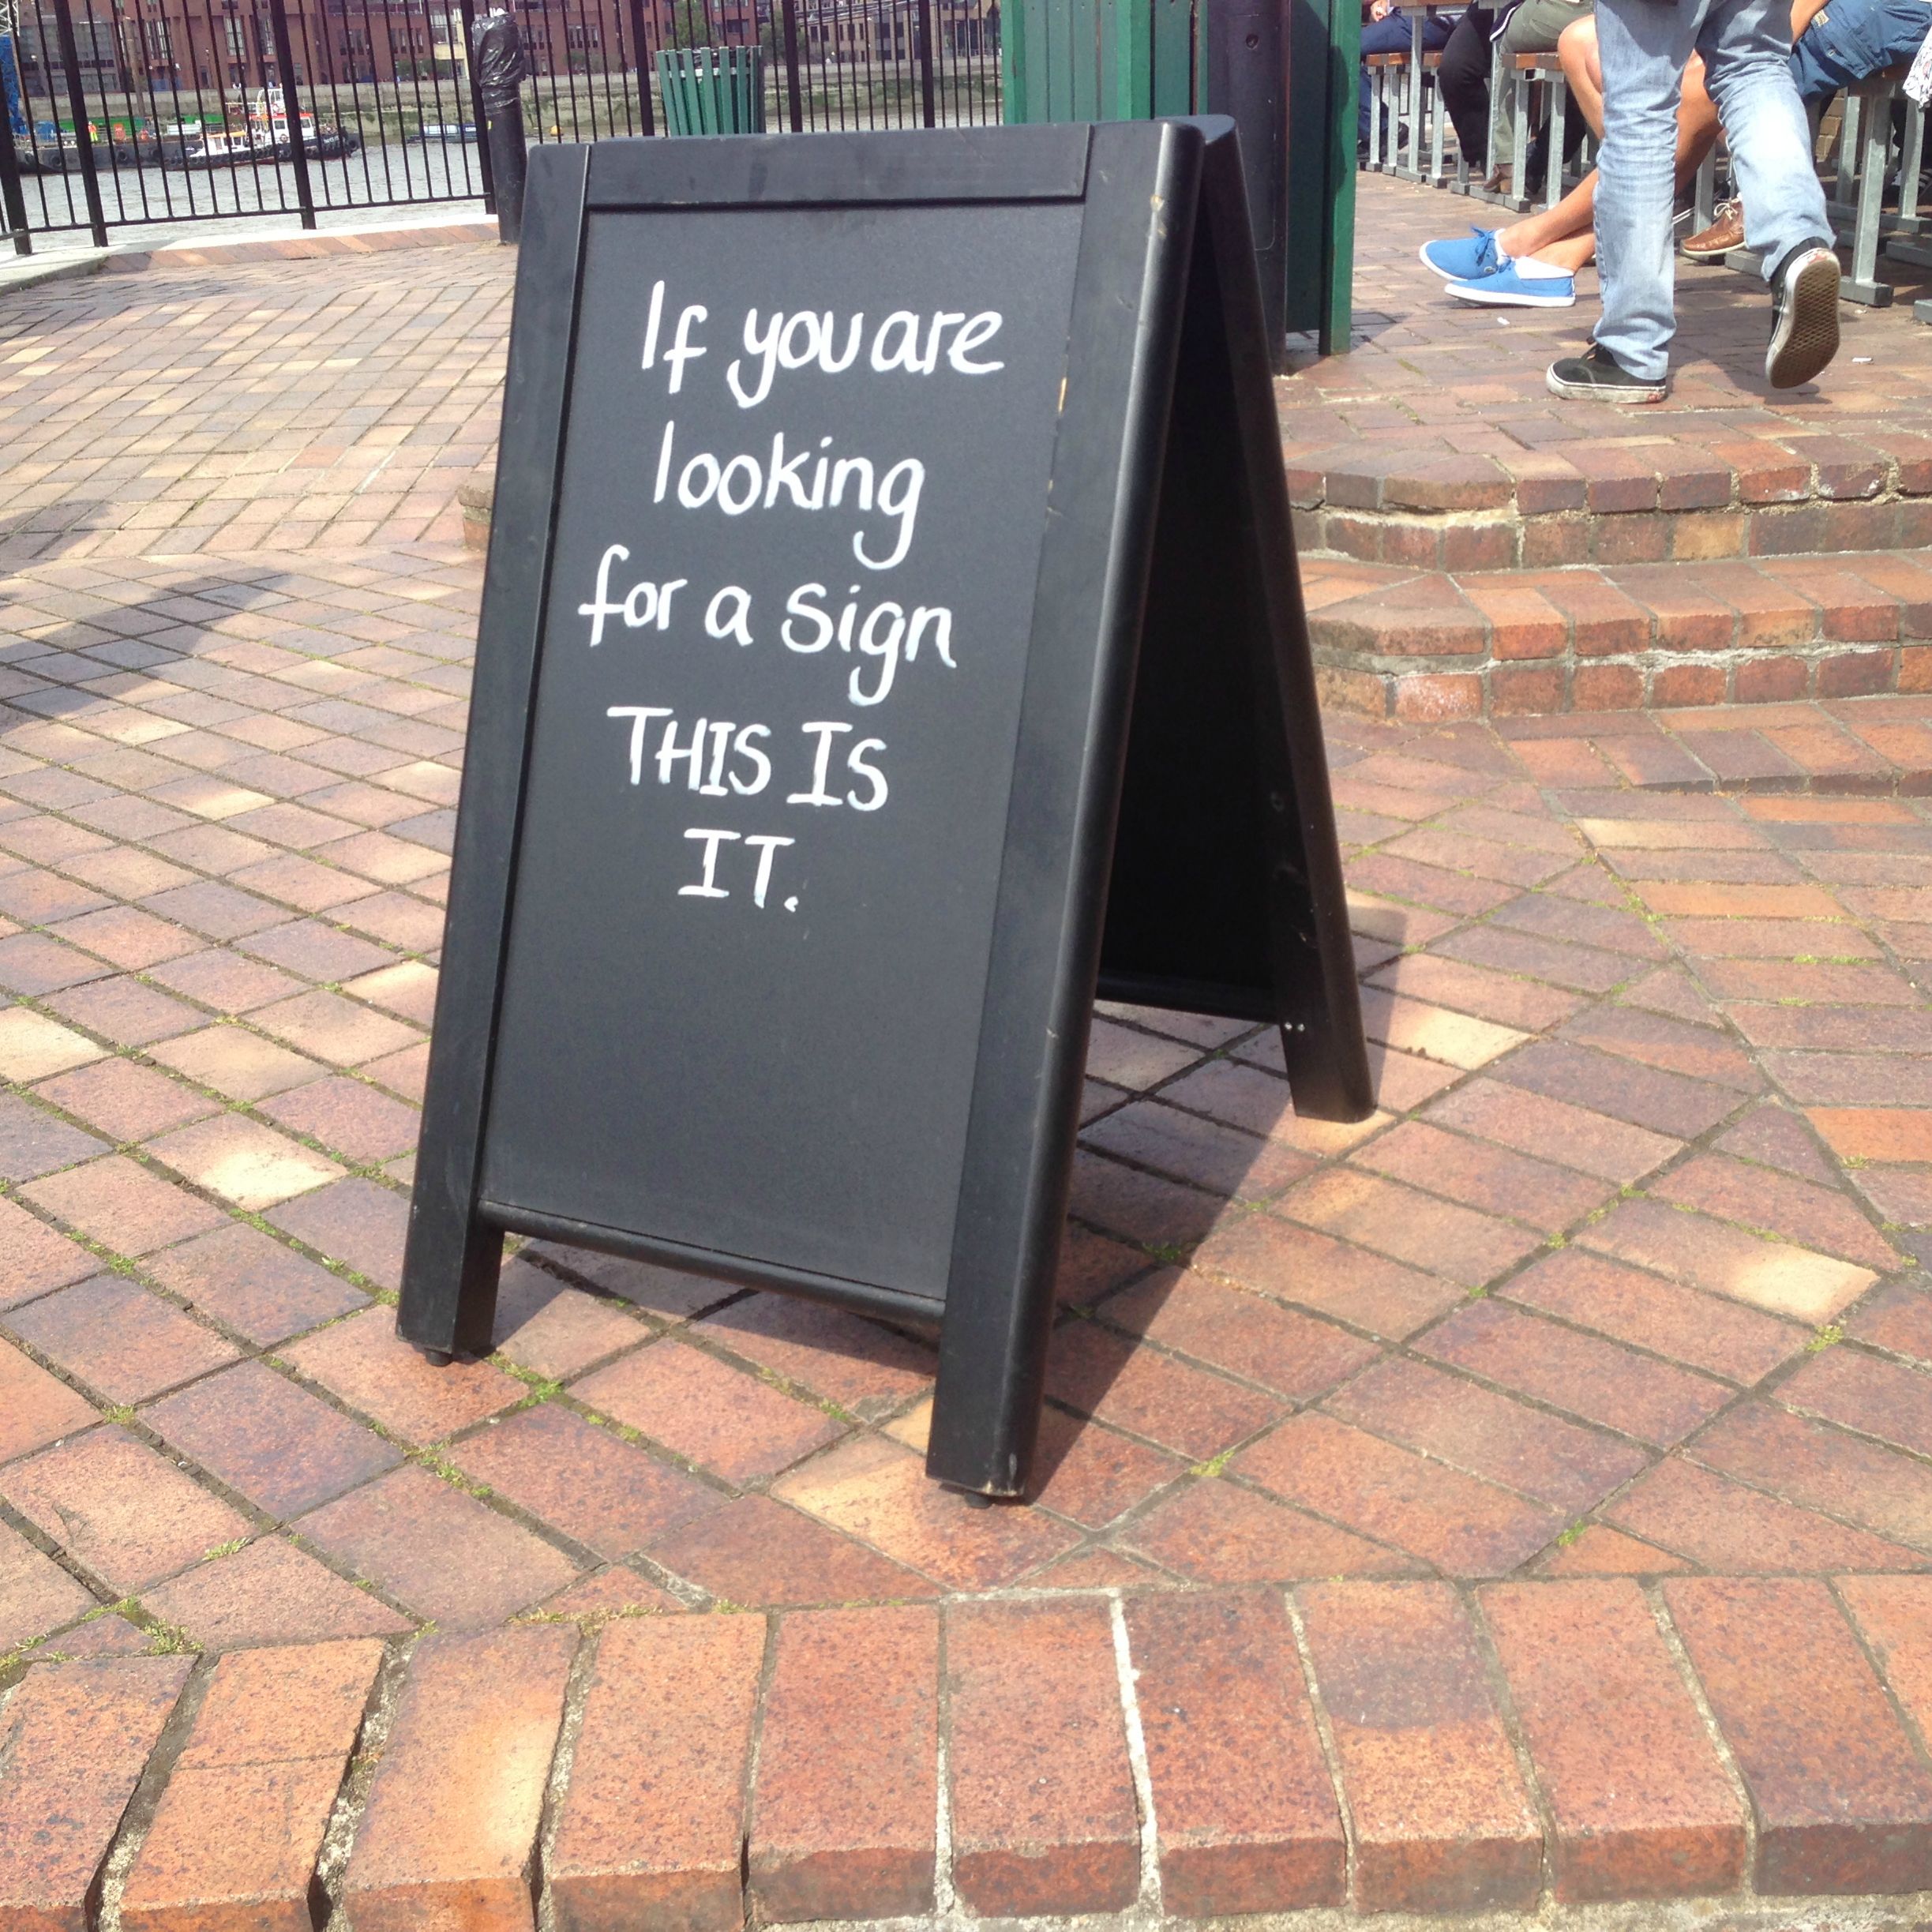 funny sidewalk signs - If you are looking for a sign This Is It.